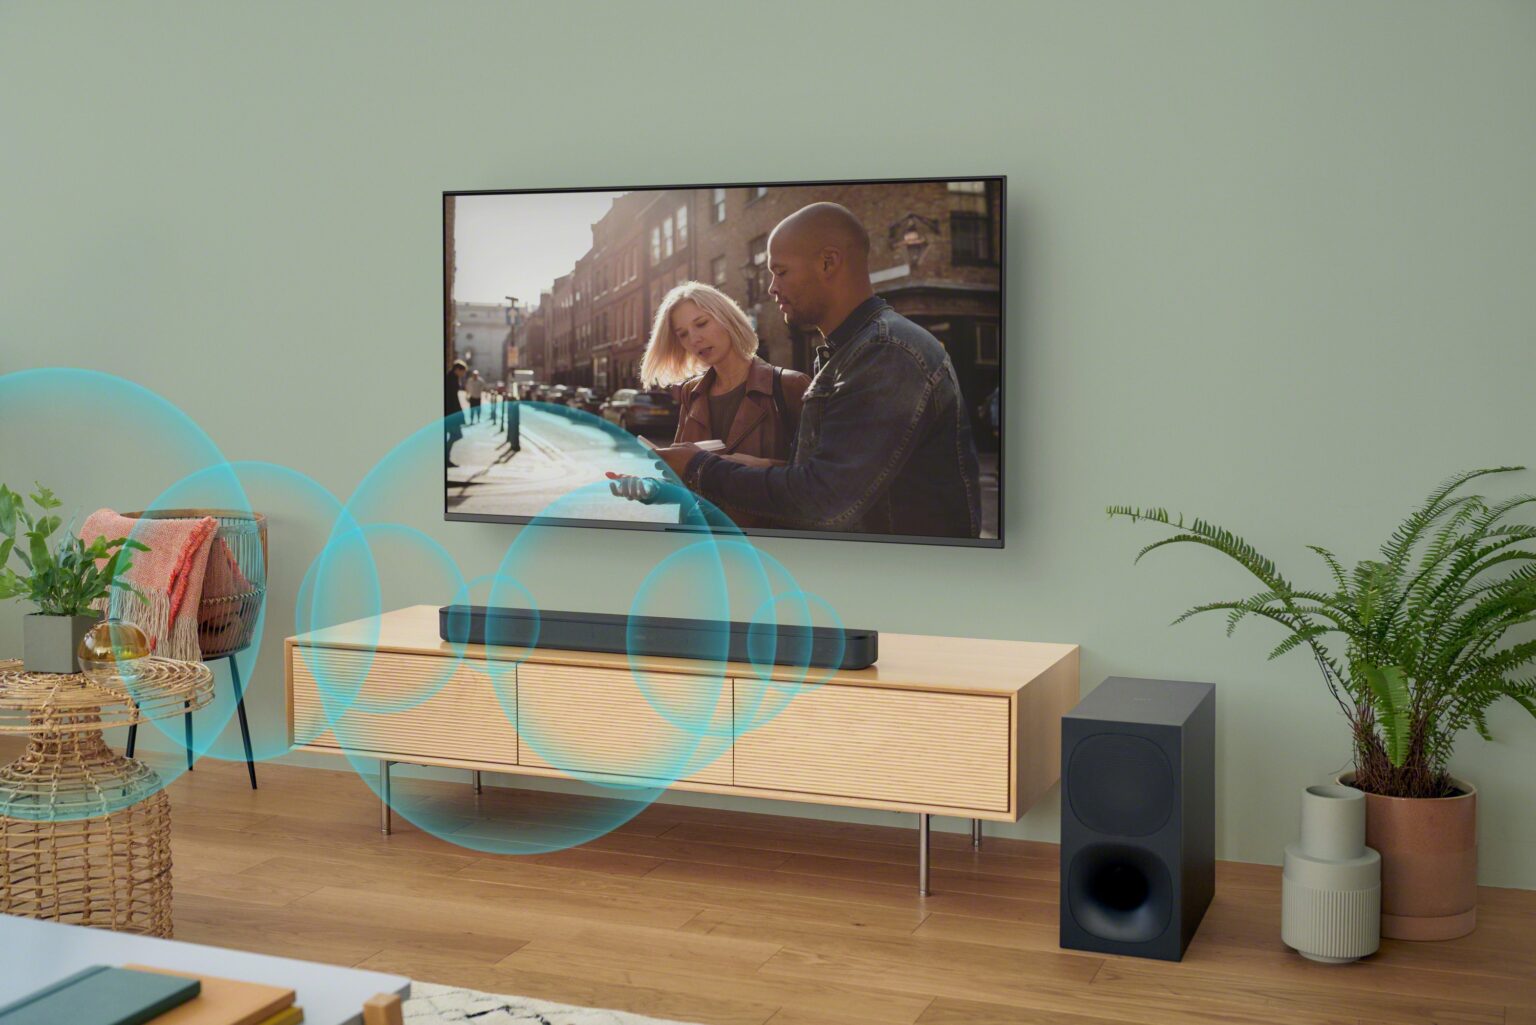 Sony's new soundbar and subwoofer combo add surround sound to your TV for $300.